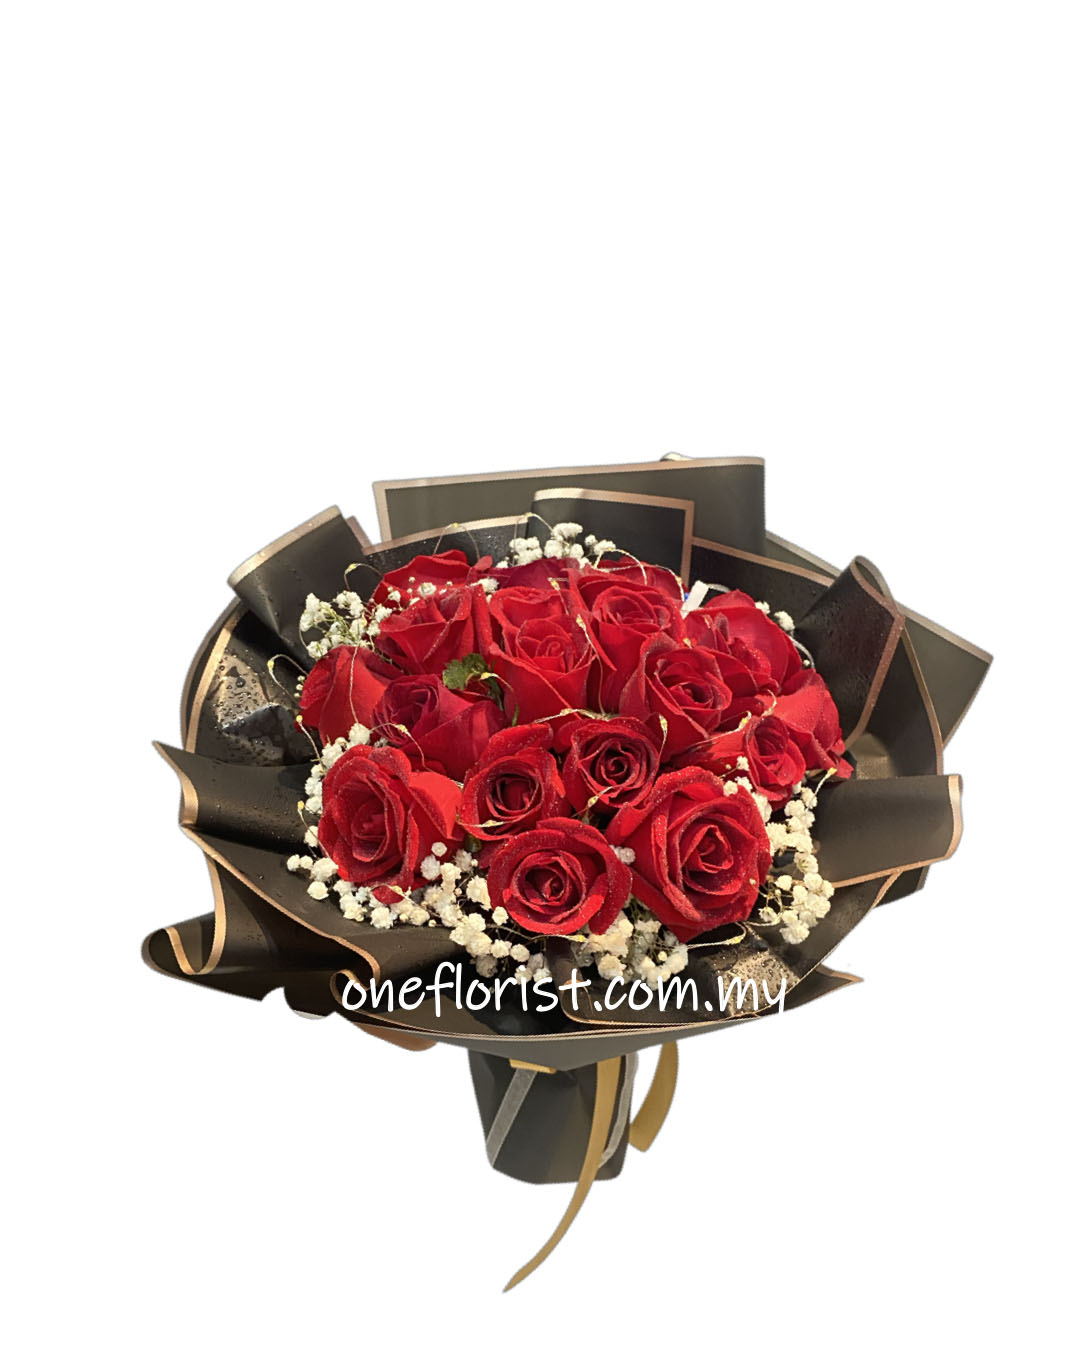 21 Red Roses Bouquet